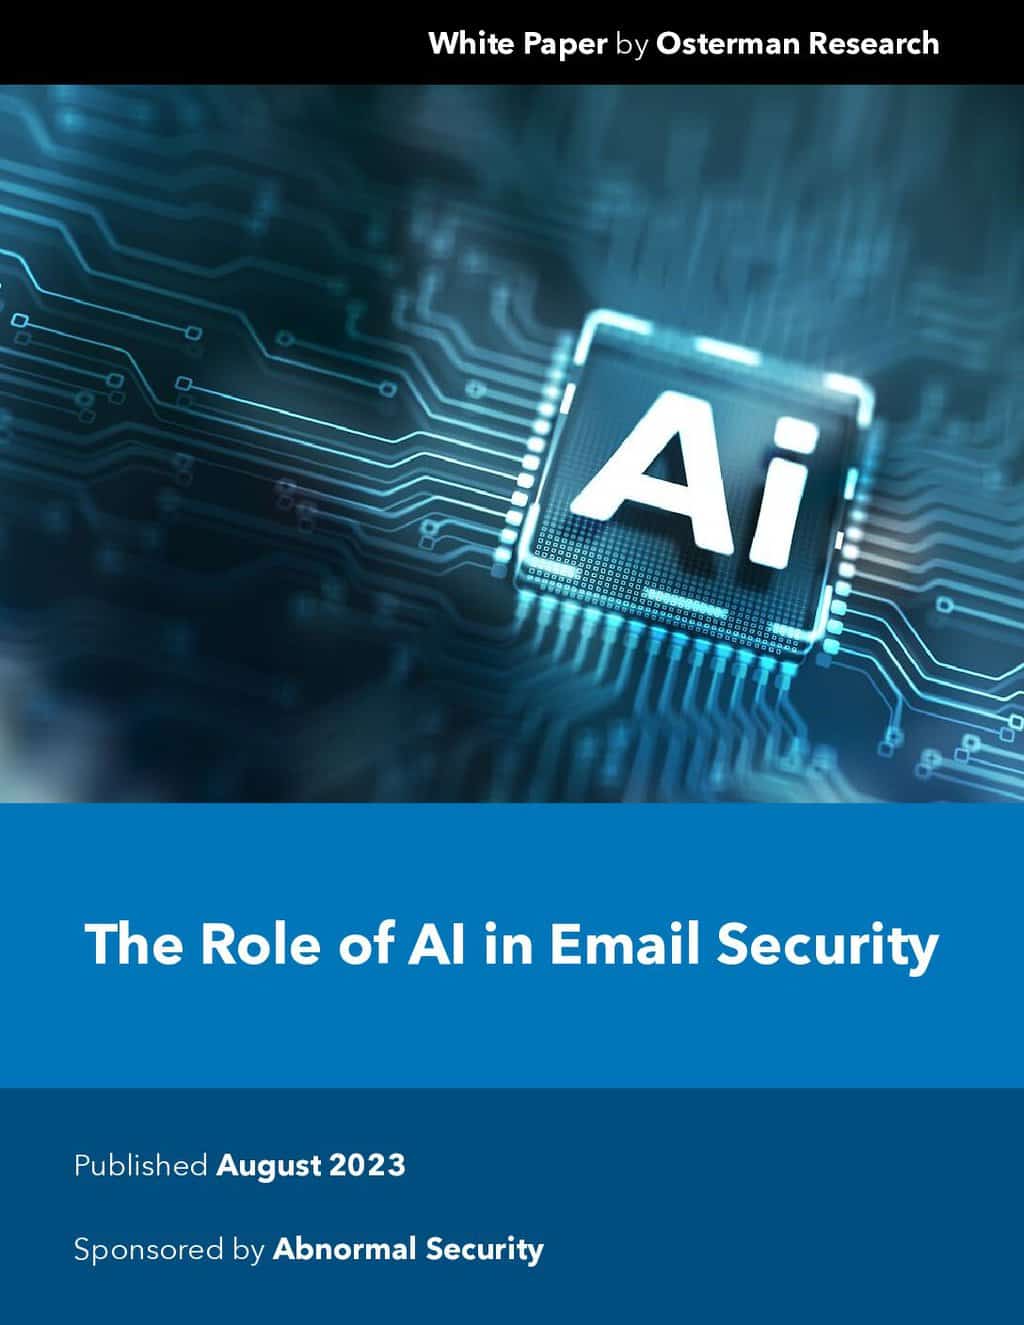 The Role of AI in Email Security